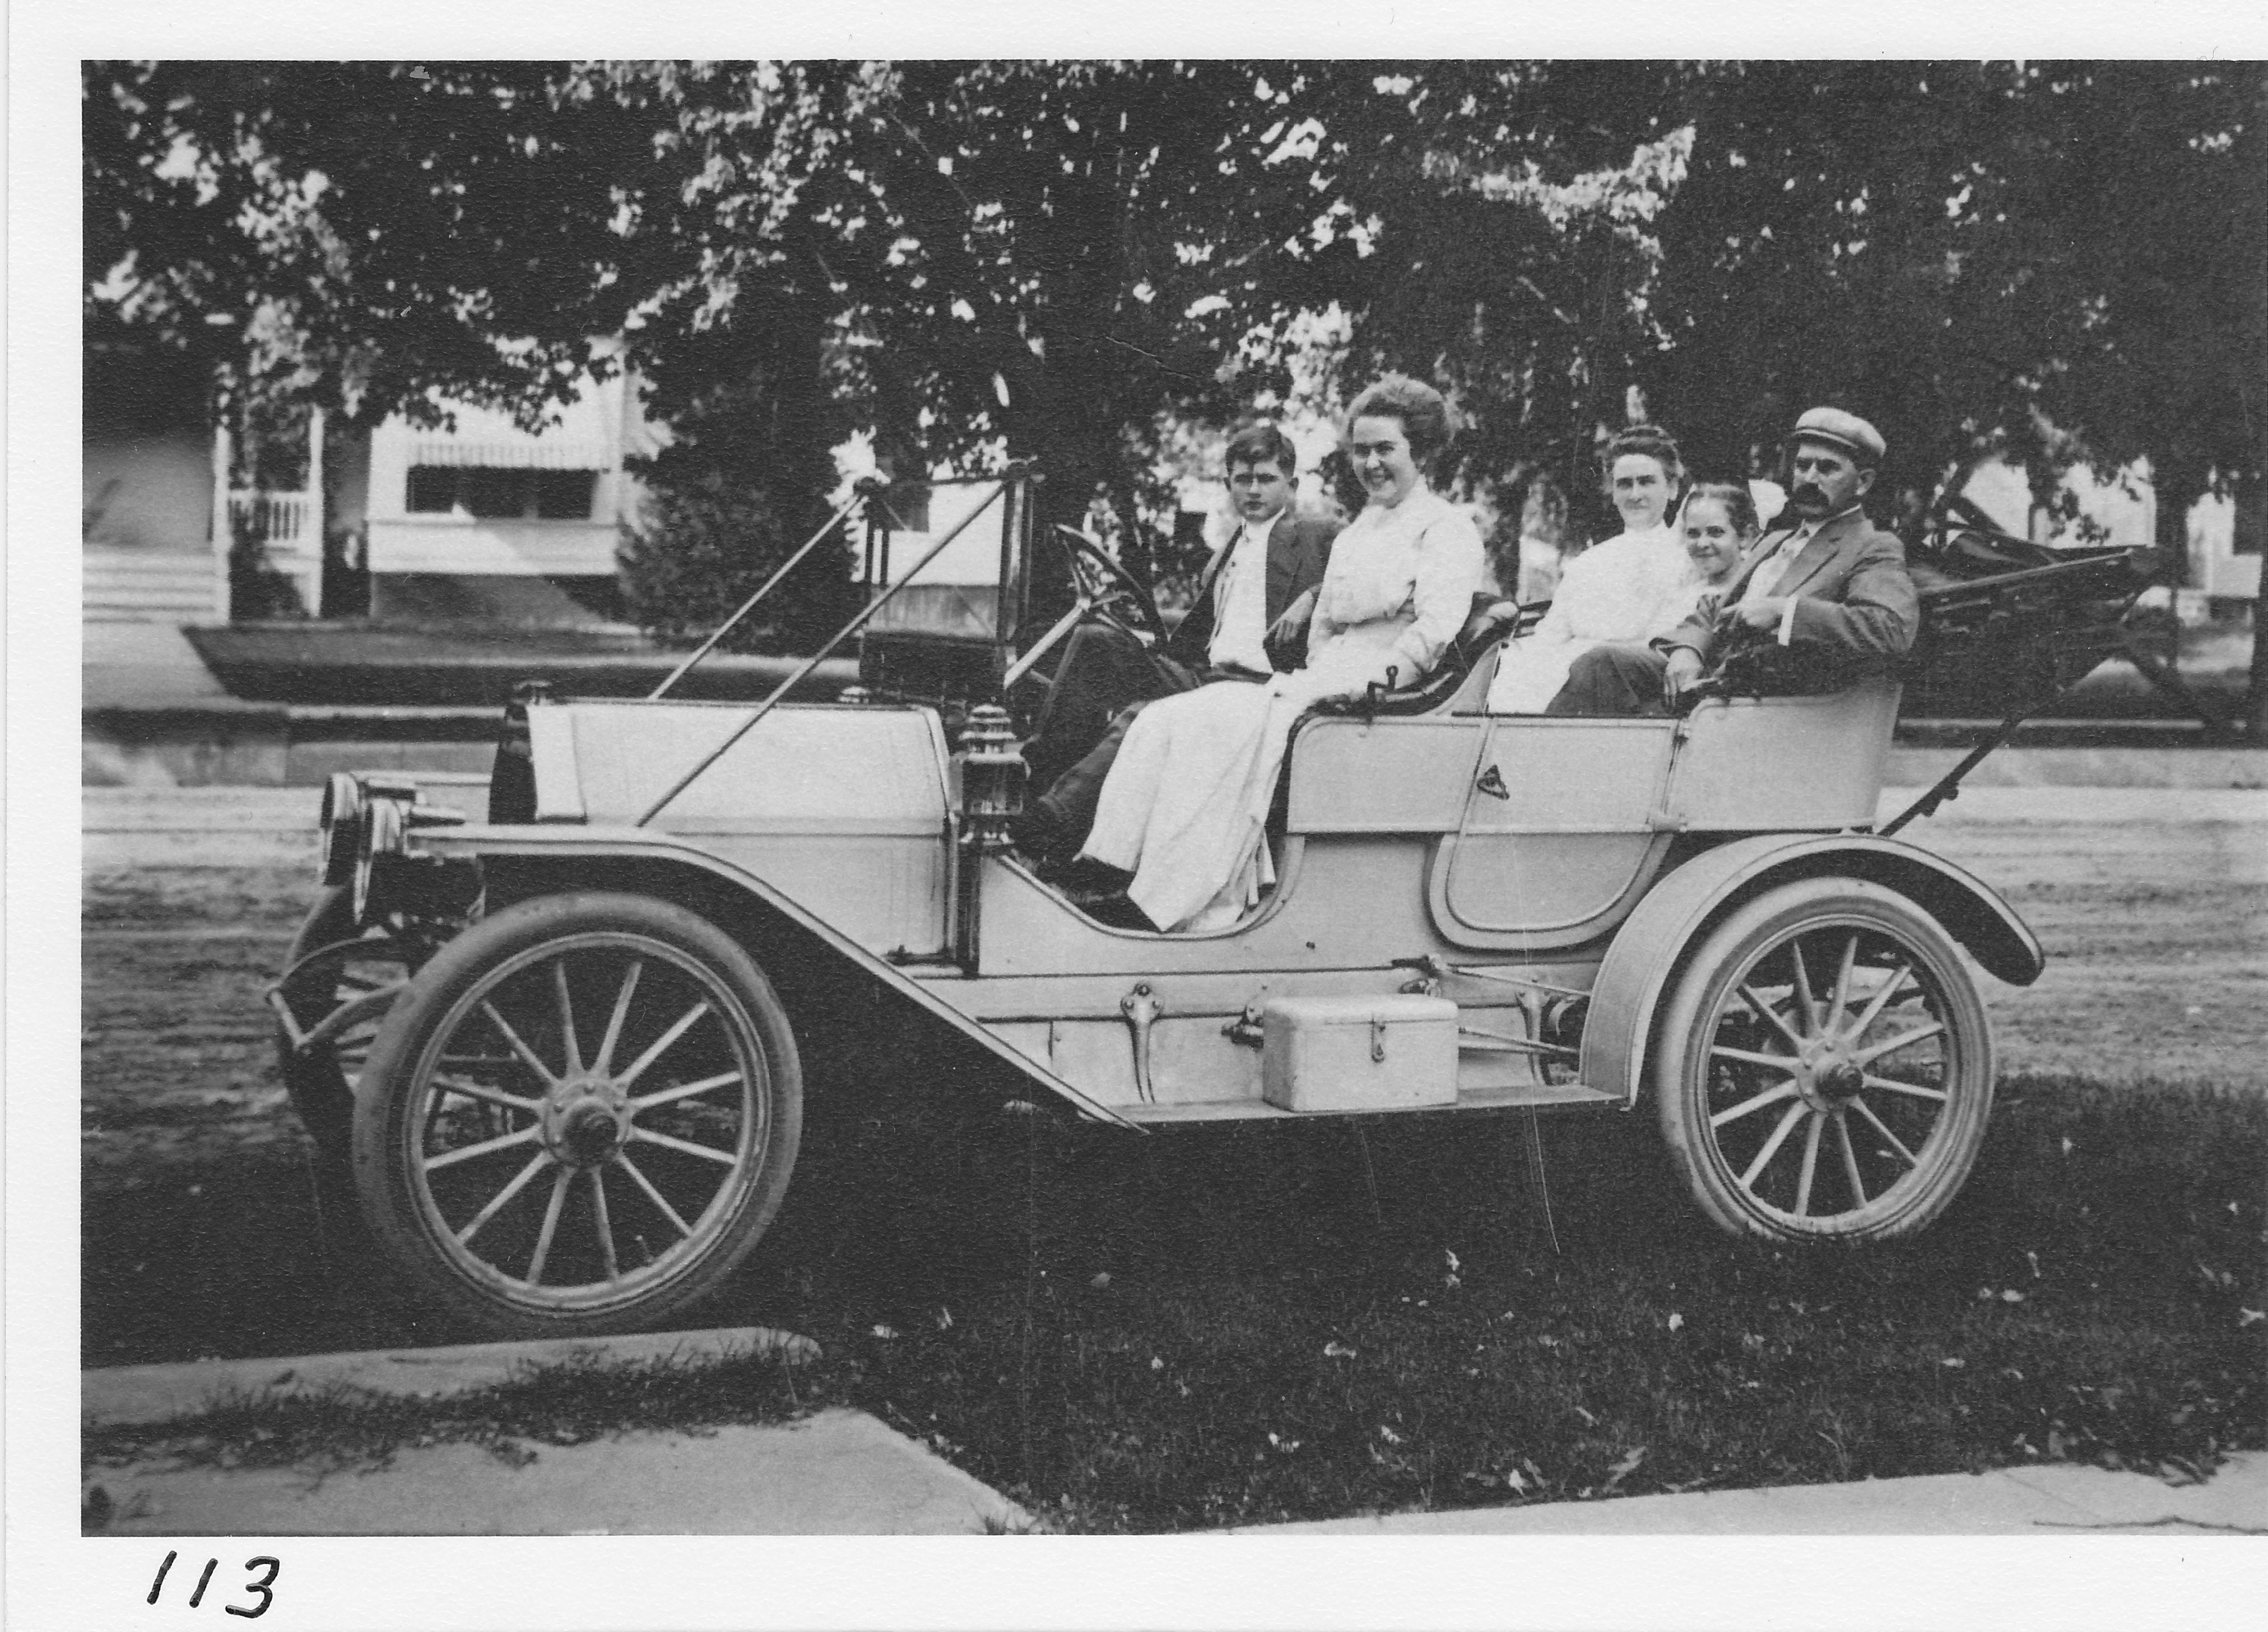 The Buck family in 1908 car at Buck’s corners.  Allie Kennedy home in background, East Main Street and East Street South.  Son Arthur and daughter Alice in front, Mrs. Buck, daughter Winifred, and Mr. Charles Buck in rear.